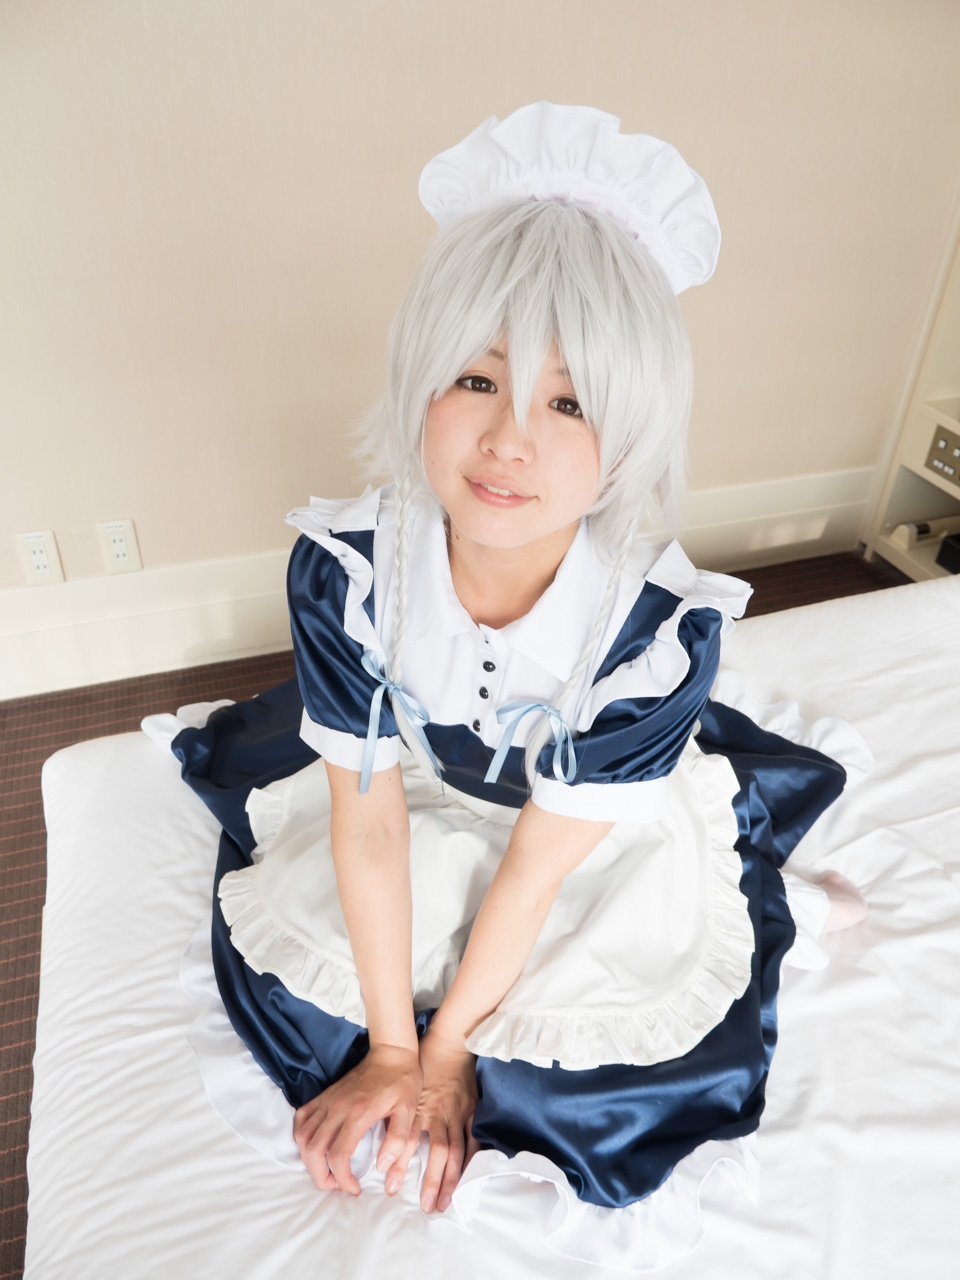 [Sakaki Cosplay Mistress] Sakaki Cosplay Mistress DL 001 (Touhou Project) 183